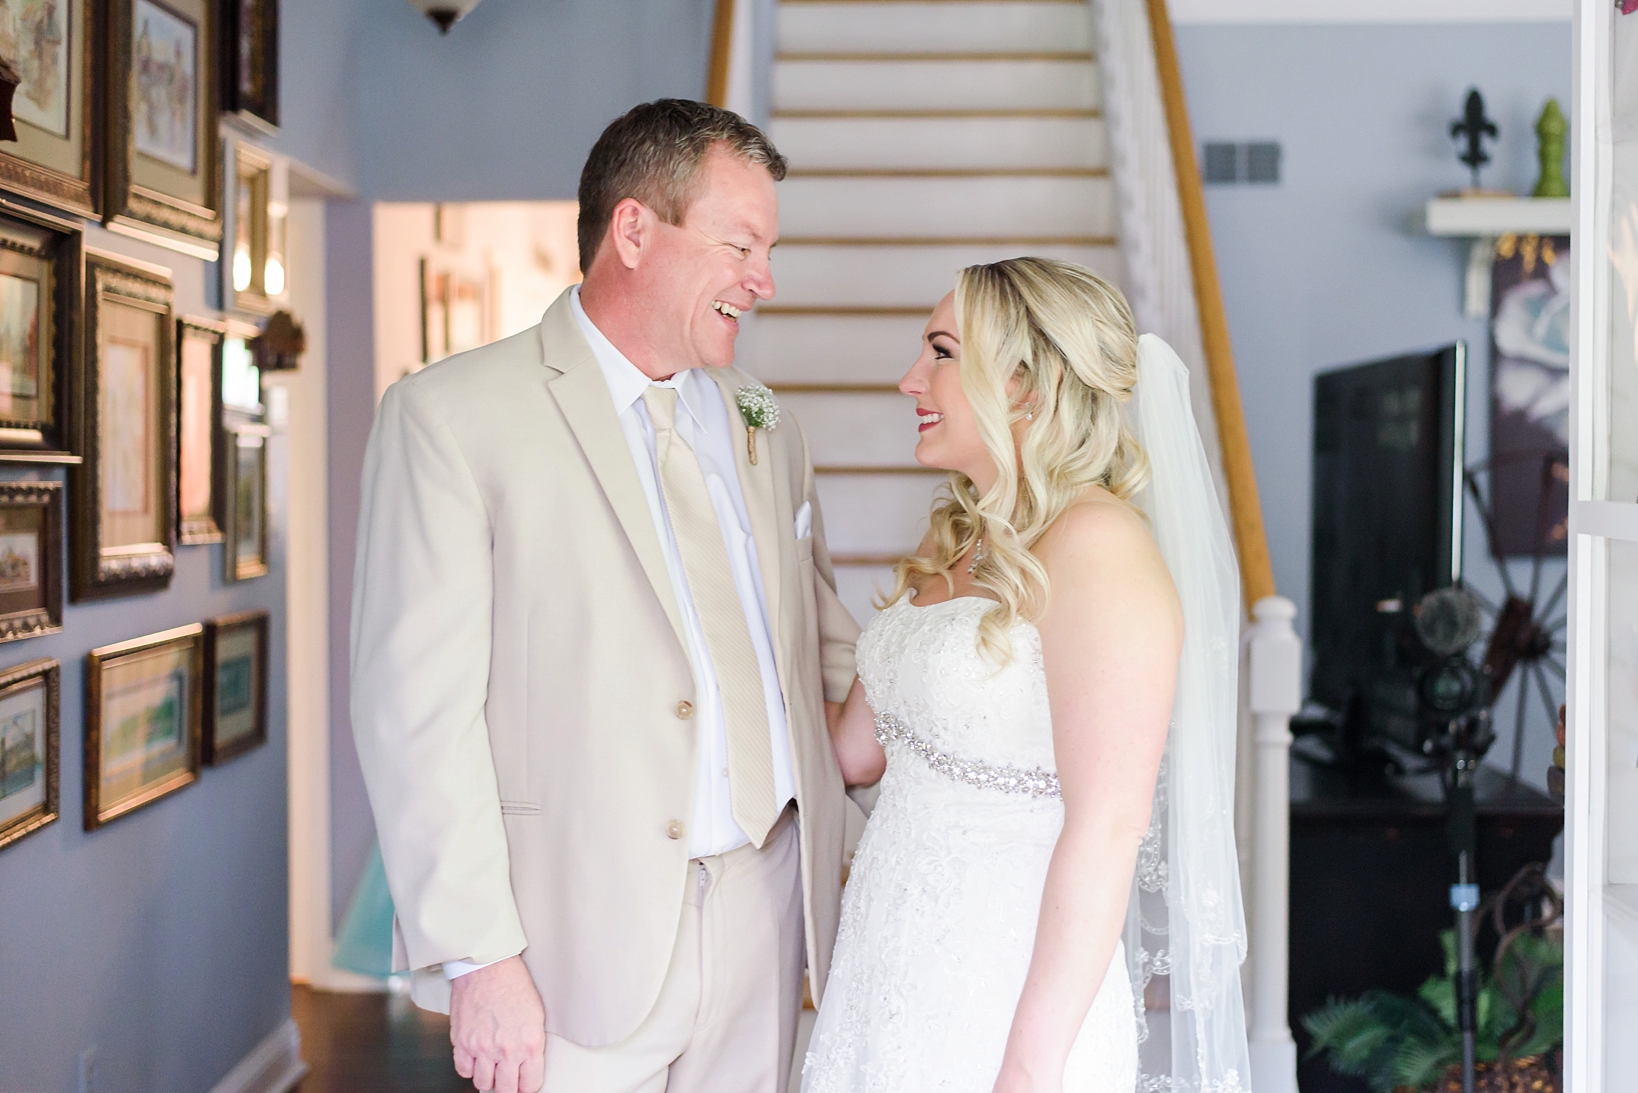 Bride and her father laughing before the wedding ceremony